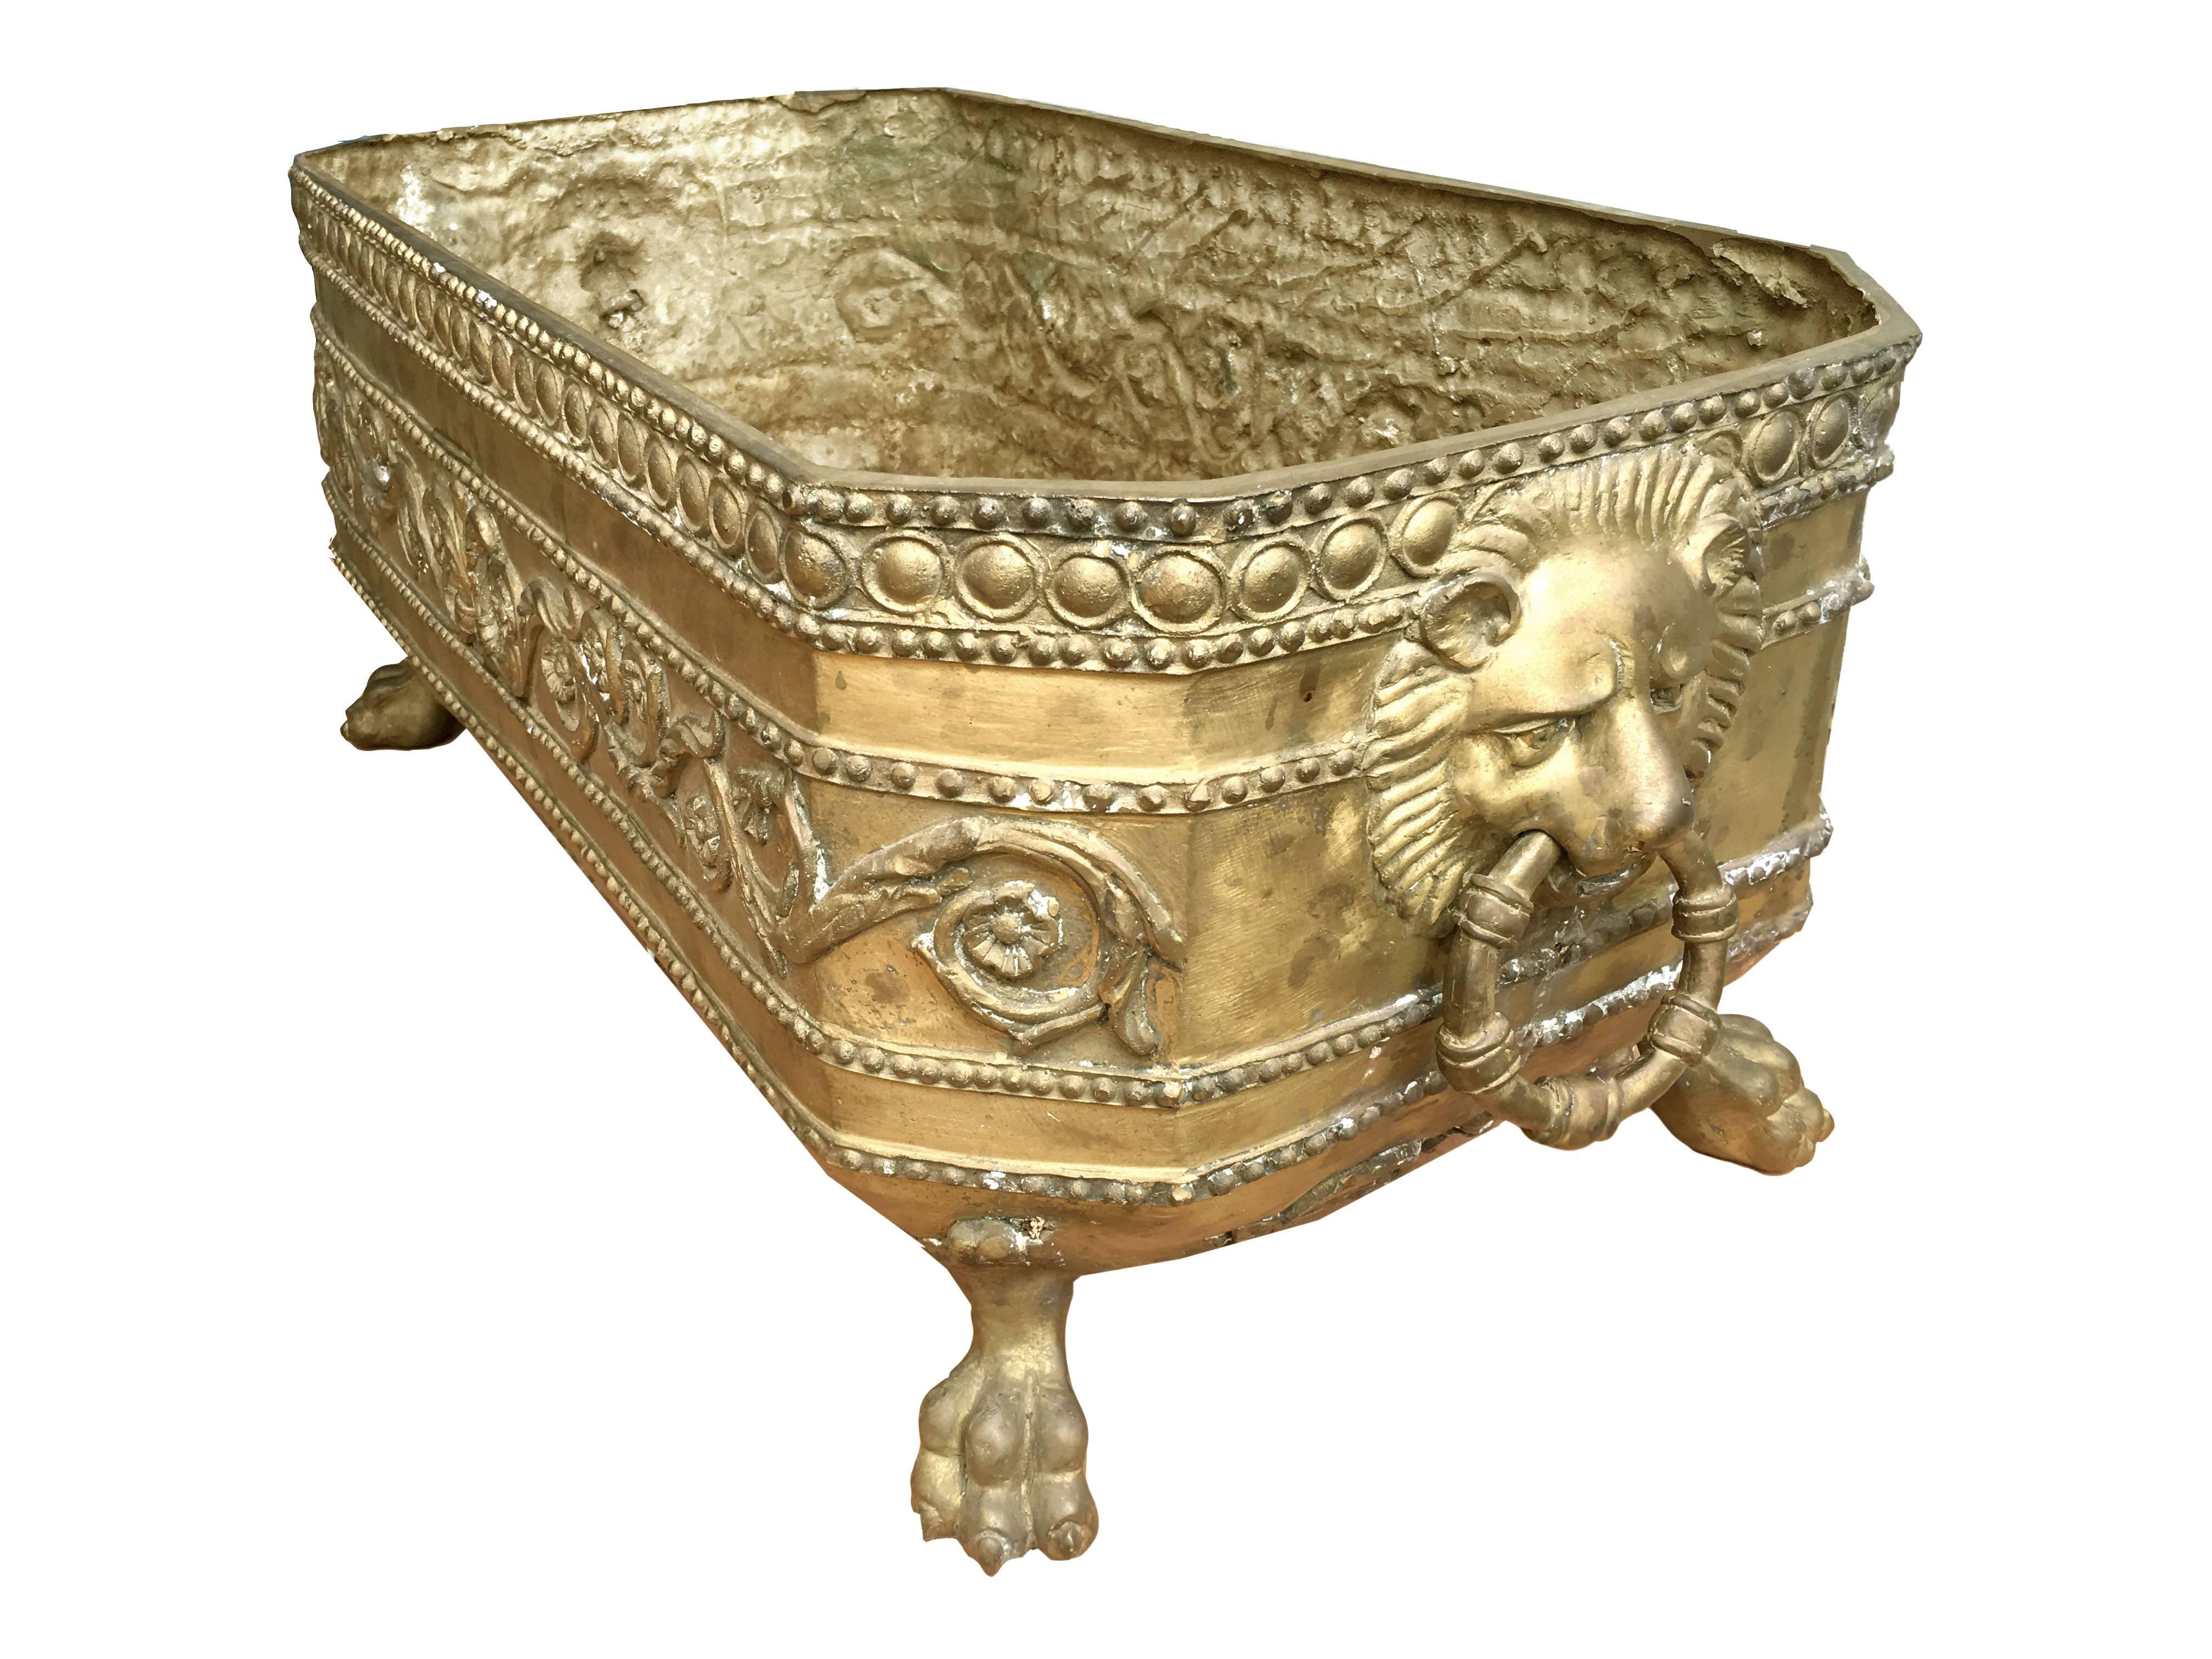 19th century grand scale footed english antique brass jardiniere with lion's heads, classical beading and scrolling vines. The whole raised on lion's paw feet.

This is a very large beautiful piece with great patina.